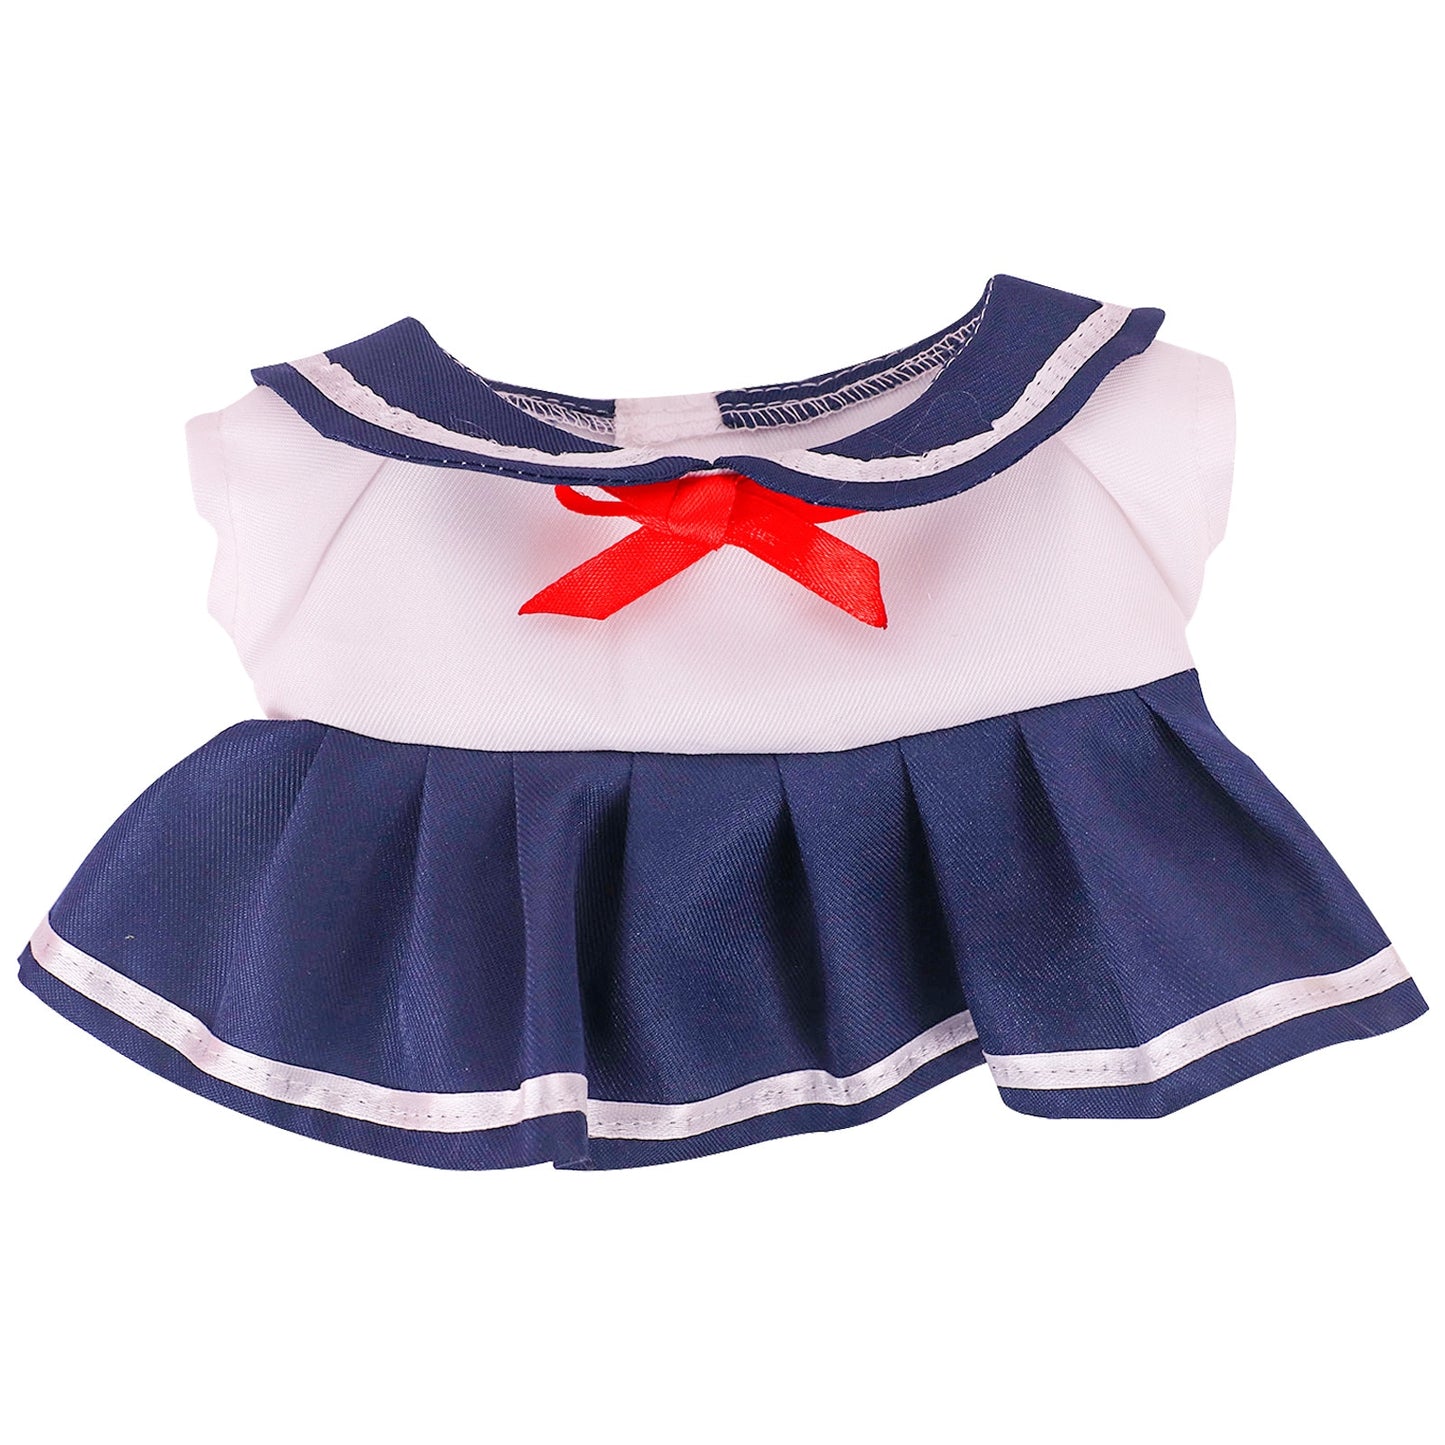 Kawaii Clothes For Duck 30cm Lalafanfan, Toy Accessories